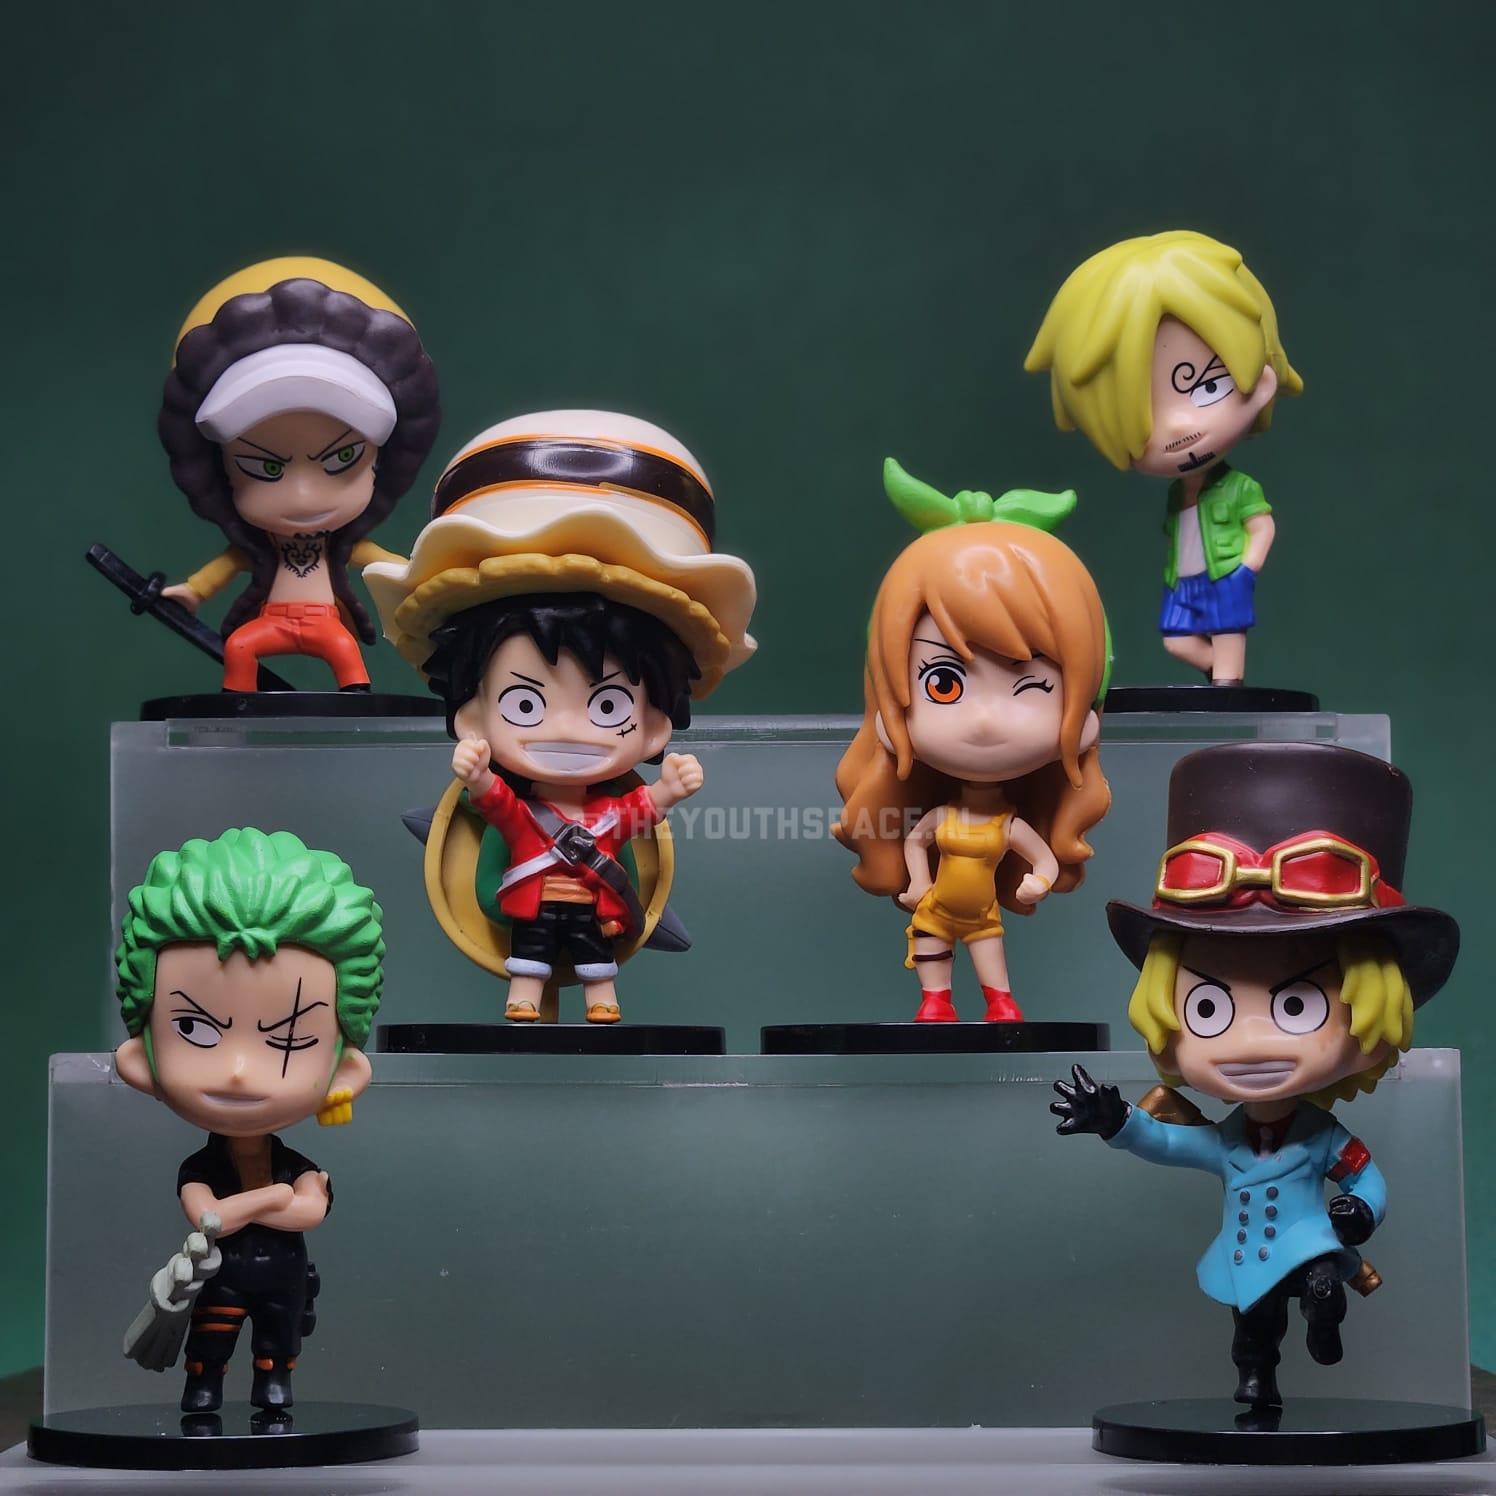 Ynynoo Monkey D Luffy Collectible Action Figure Model Toys One Piece Figure   Monkey D Luffy Collectible Action Figure Model Toys One Piece Figure   Buy Monkey D Luffy From One Piece